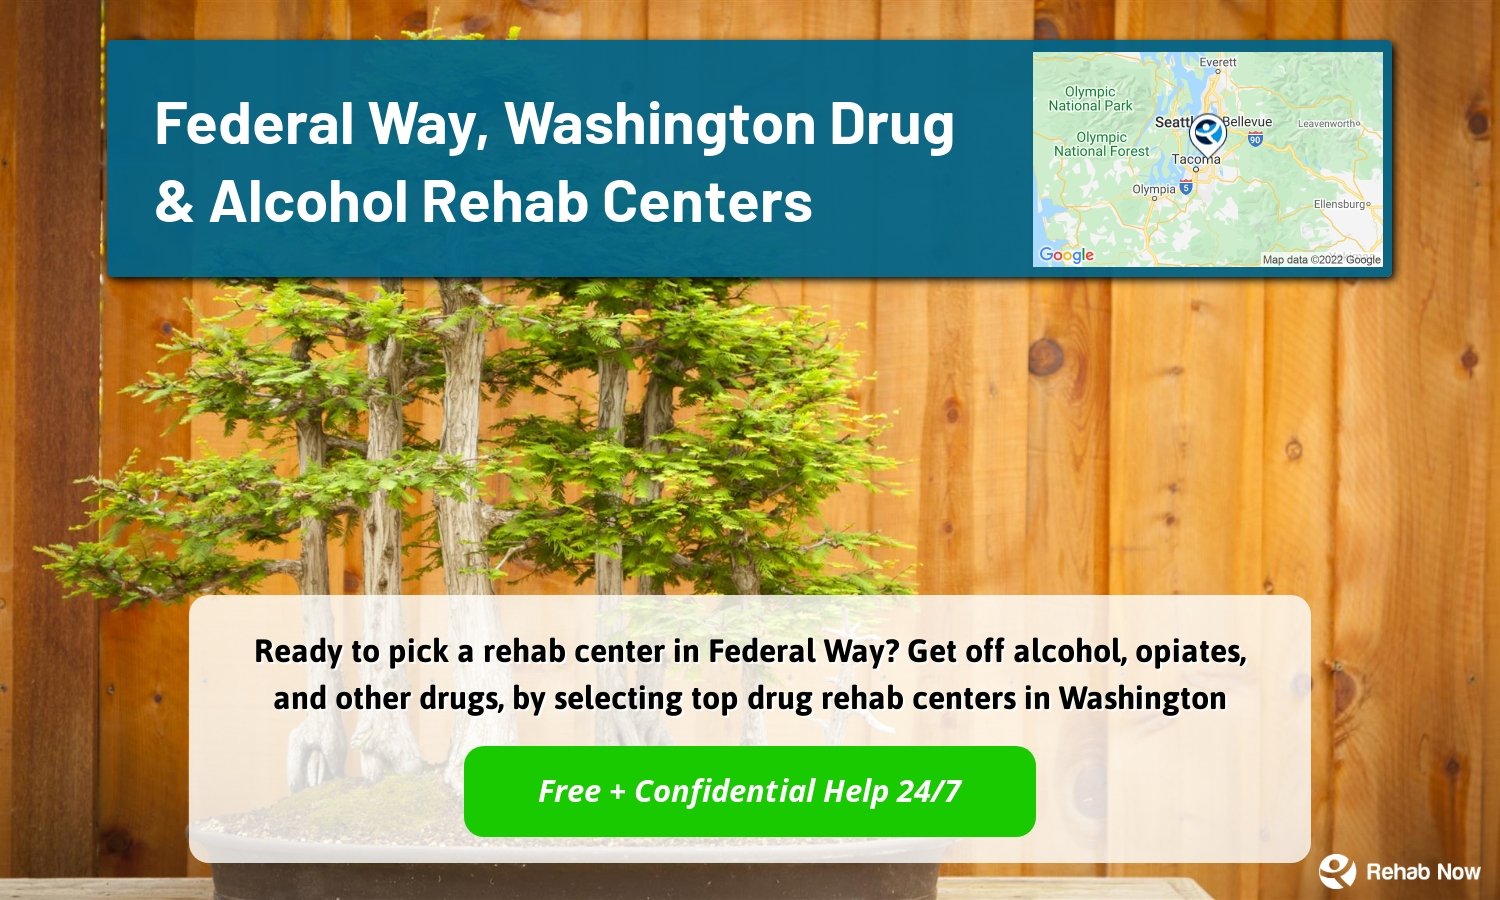 Ready to pick a rehab center in Federal Way? Get off alcohol, opiates, and other drugs, by selecting top drug rehab centers in Washington